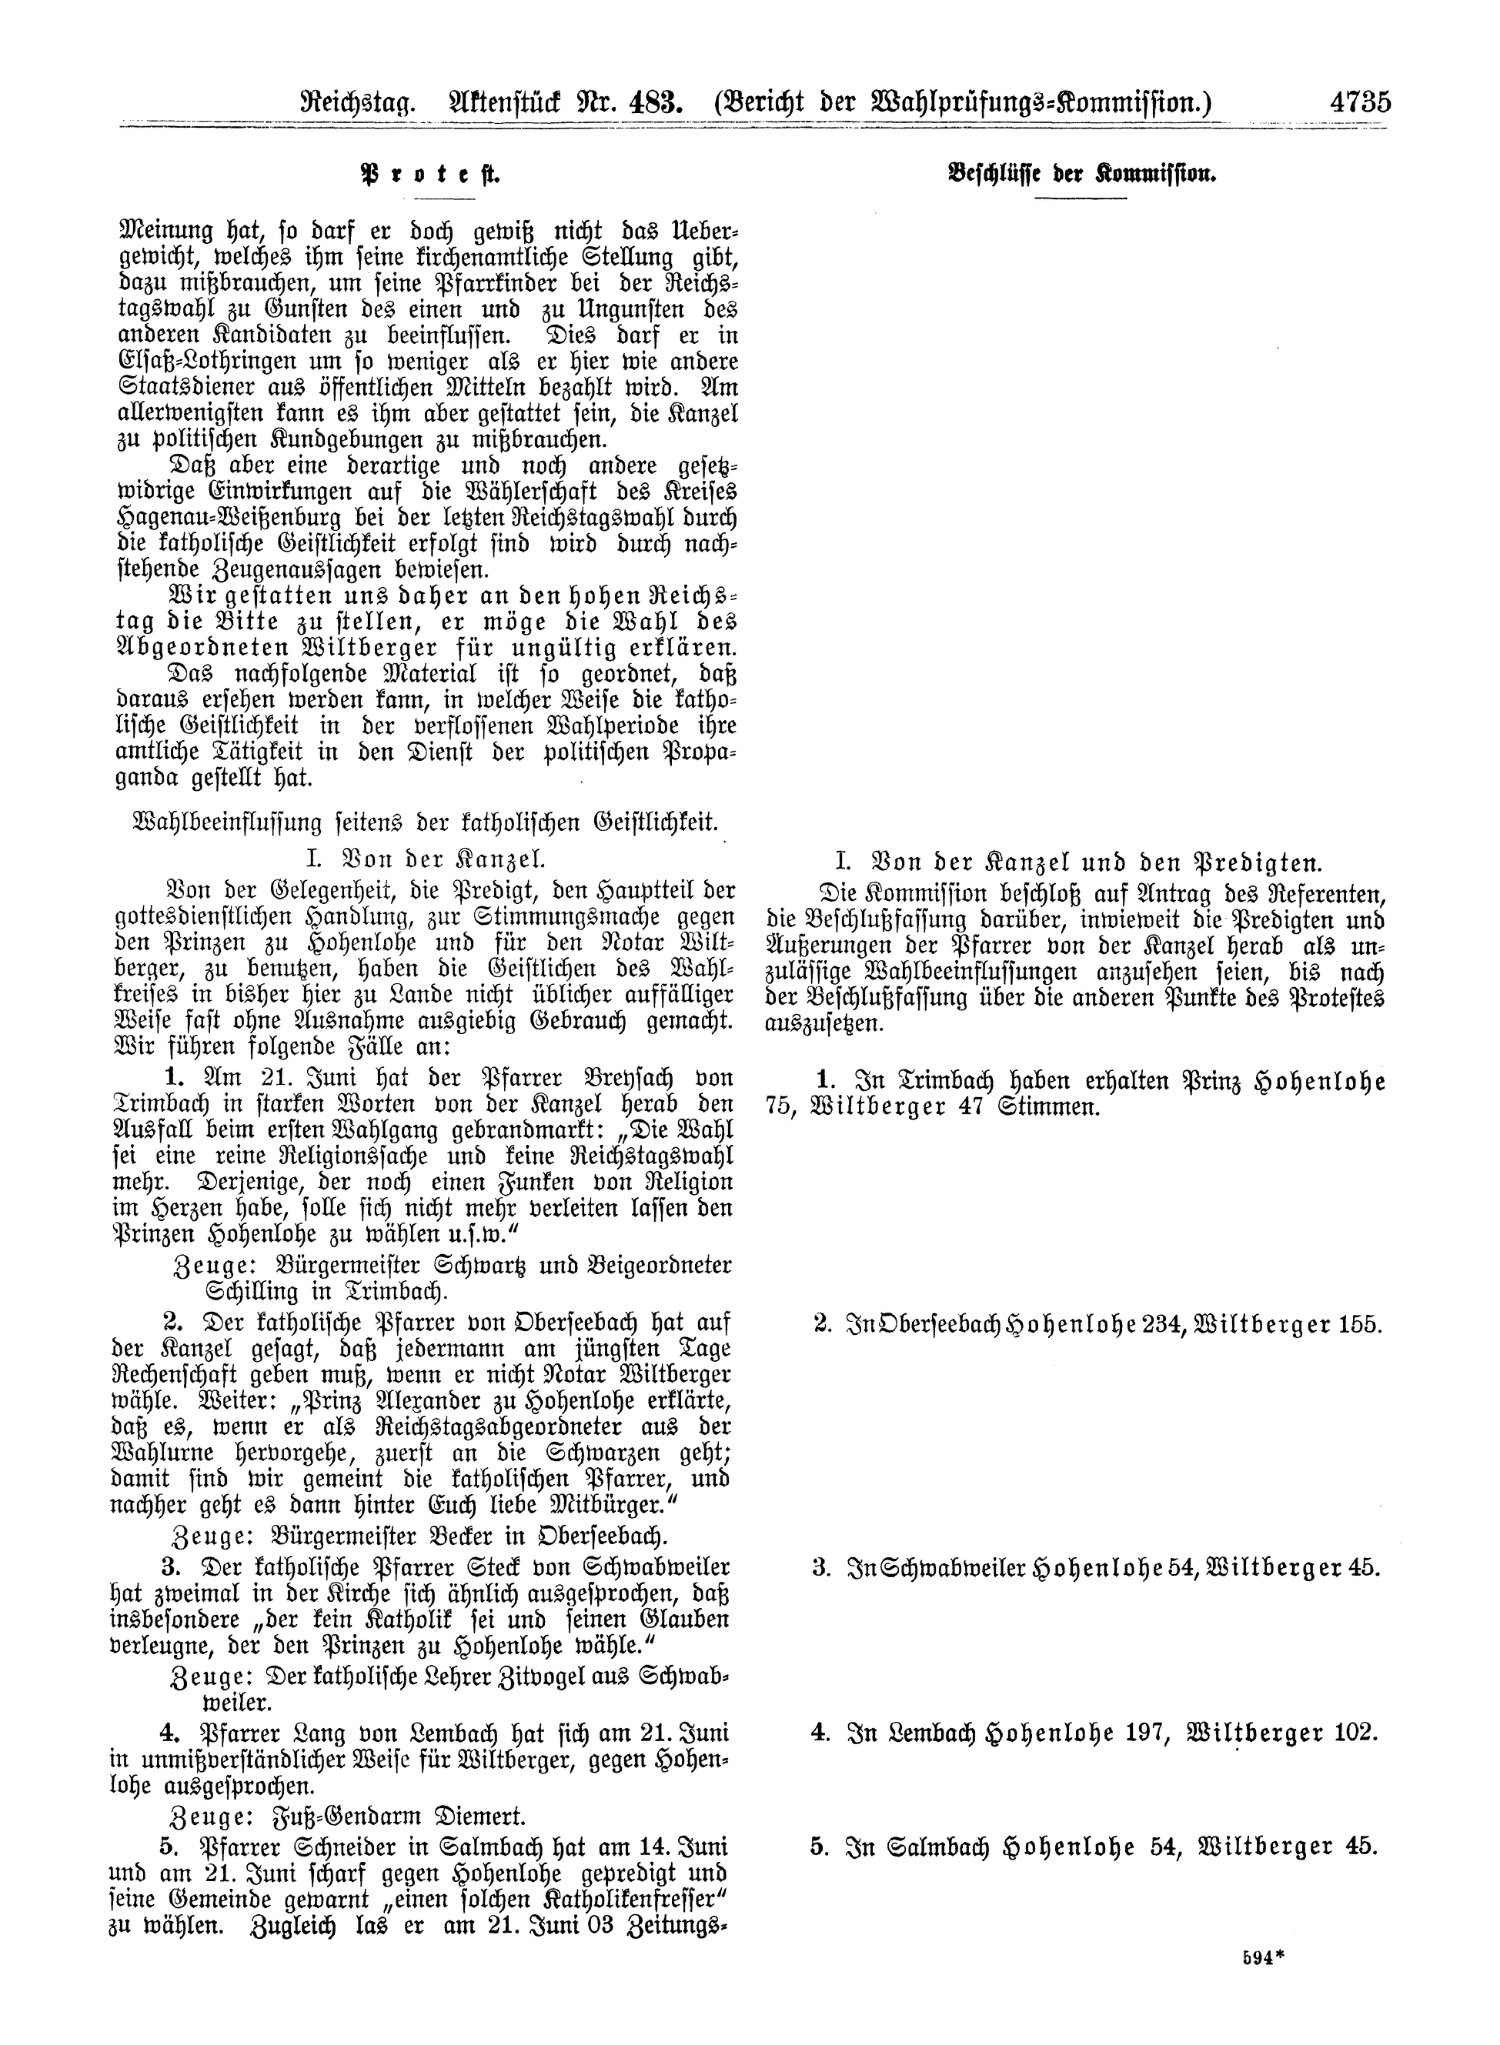 Scan of page 4735